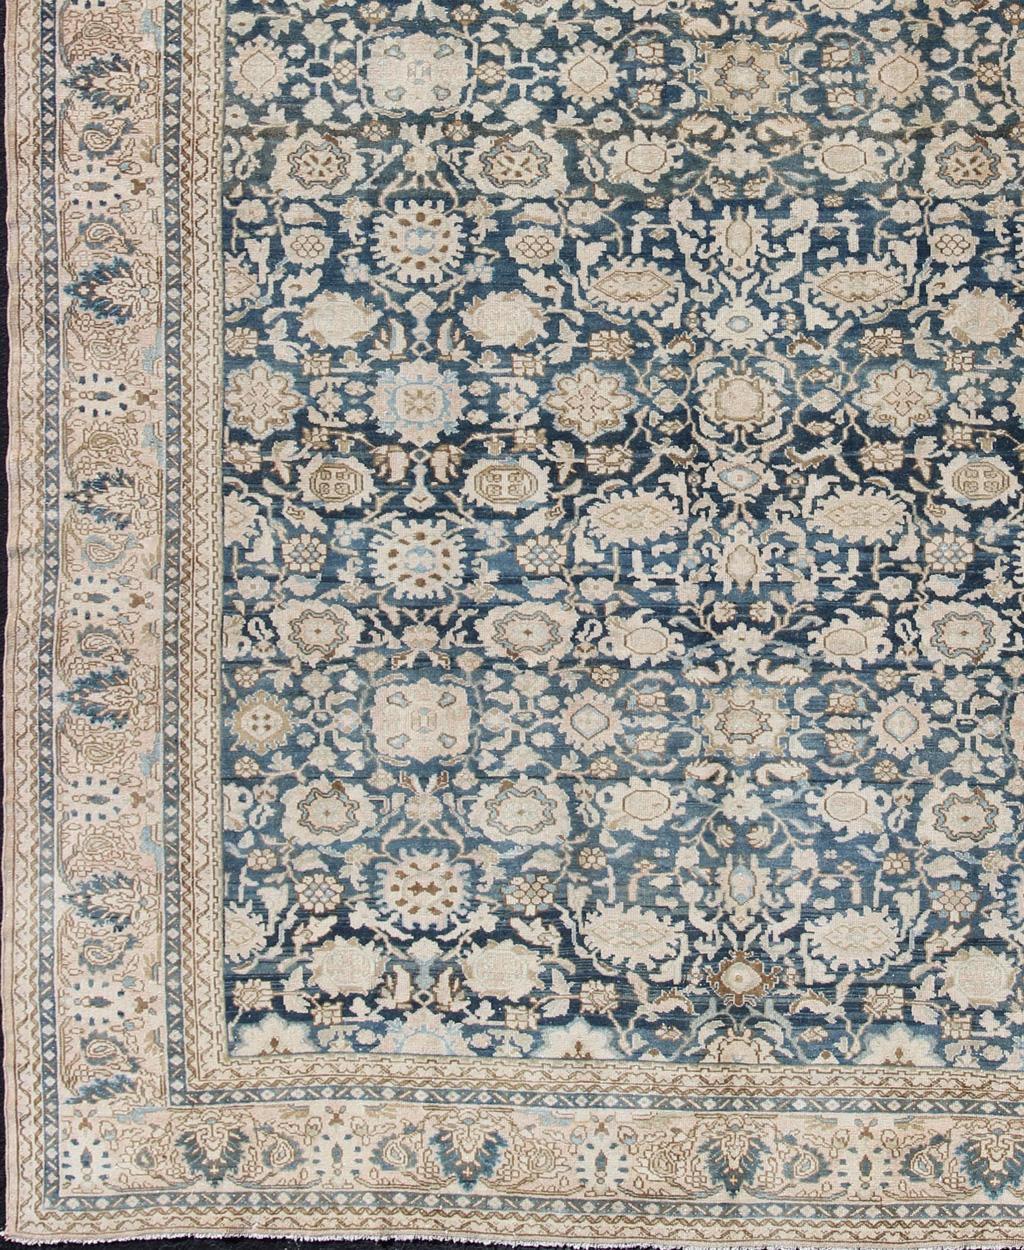 All-over blue floral Persian Hamadan rug in navy blue and earthy tones. Antique Persian rug in navy tones with geometric motifs, rug 19-1101, country of origin / type: Iran / Hamadan, circa 1920.

This large Persian antique Hamadan carpet from 1920